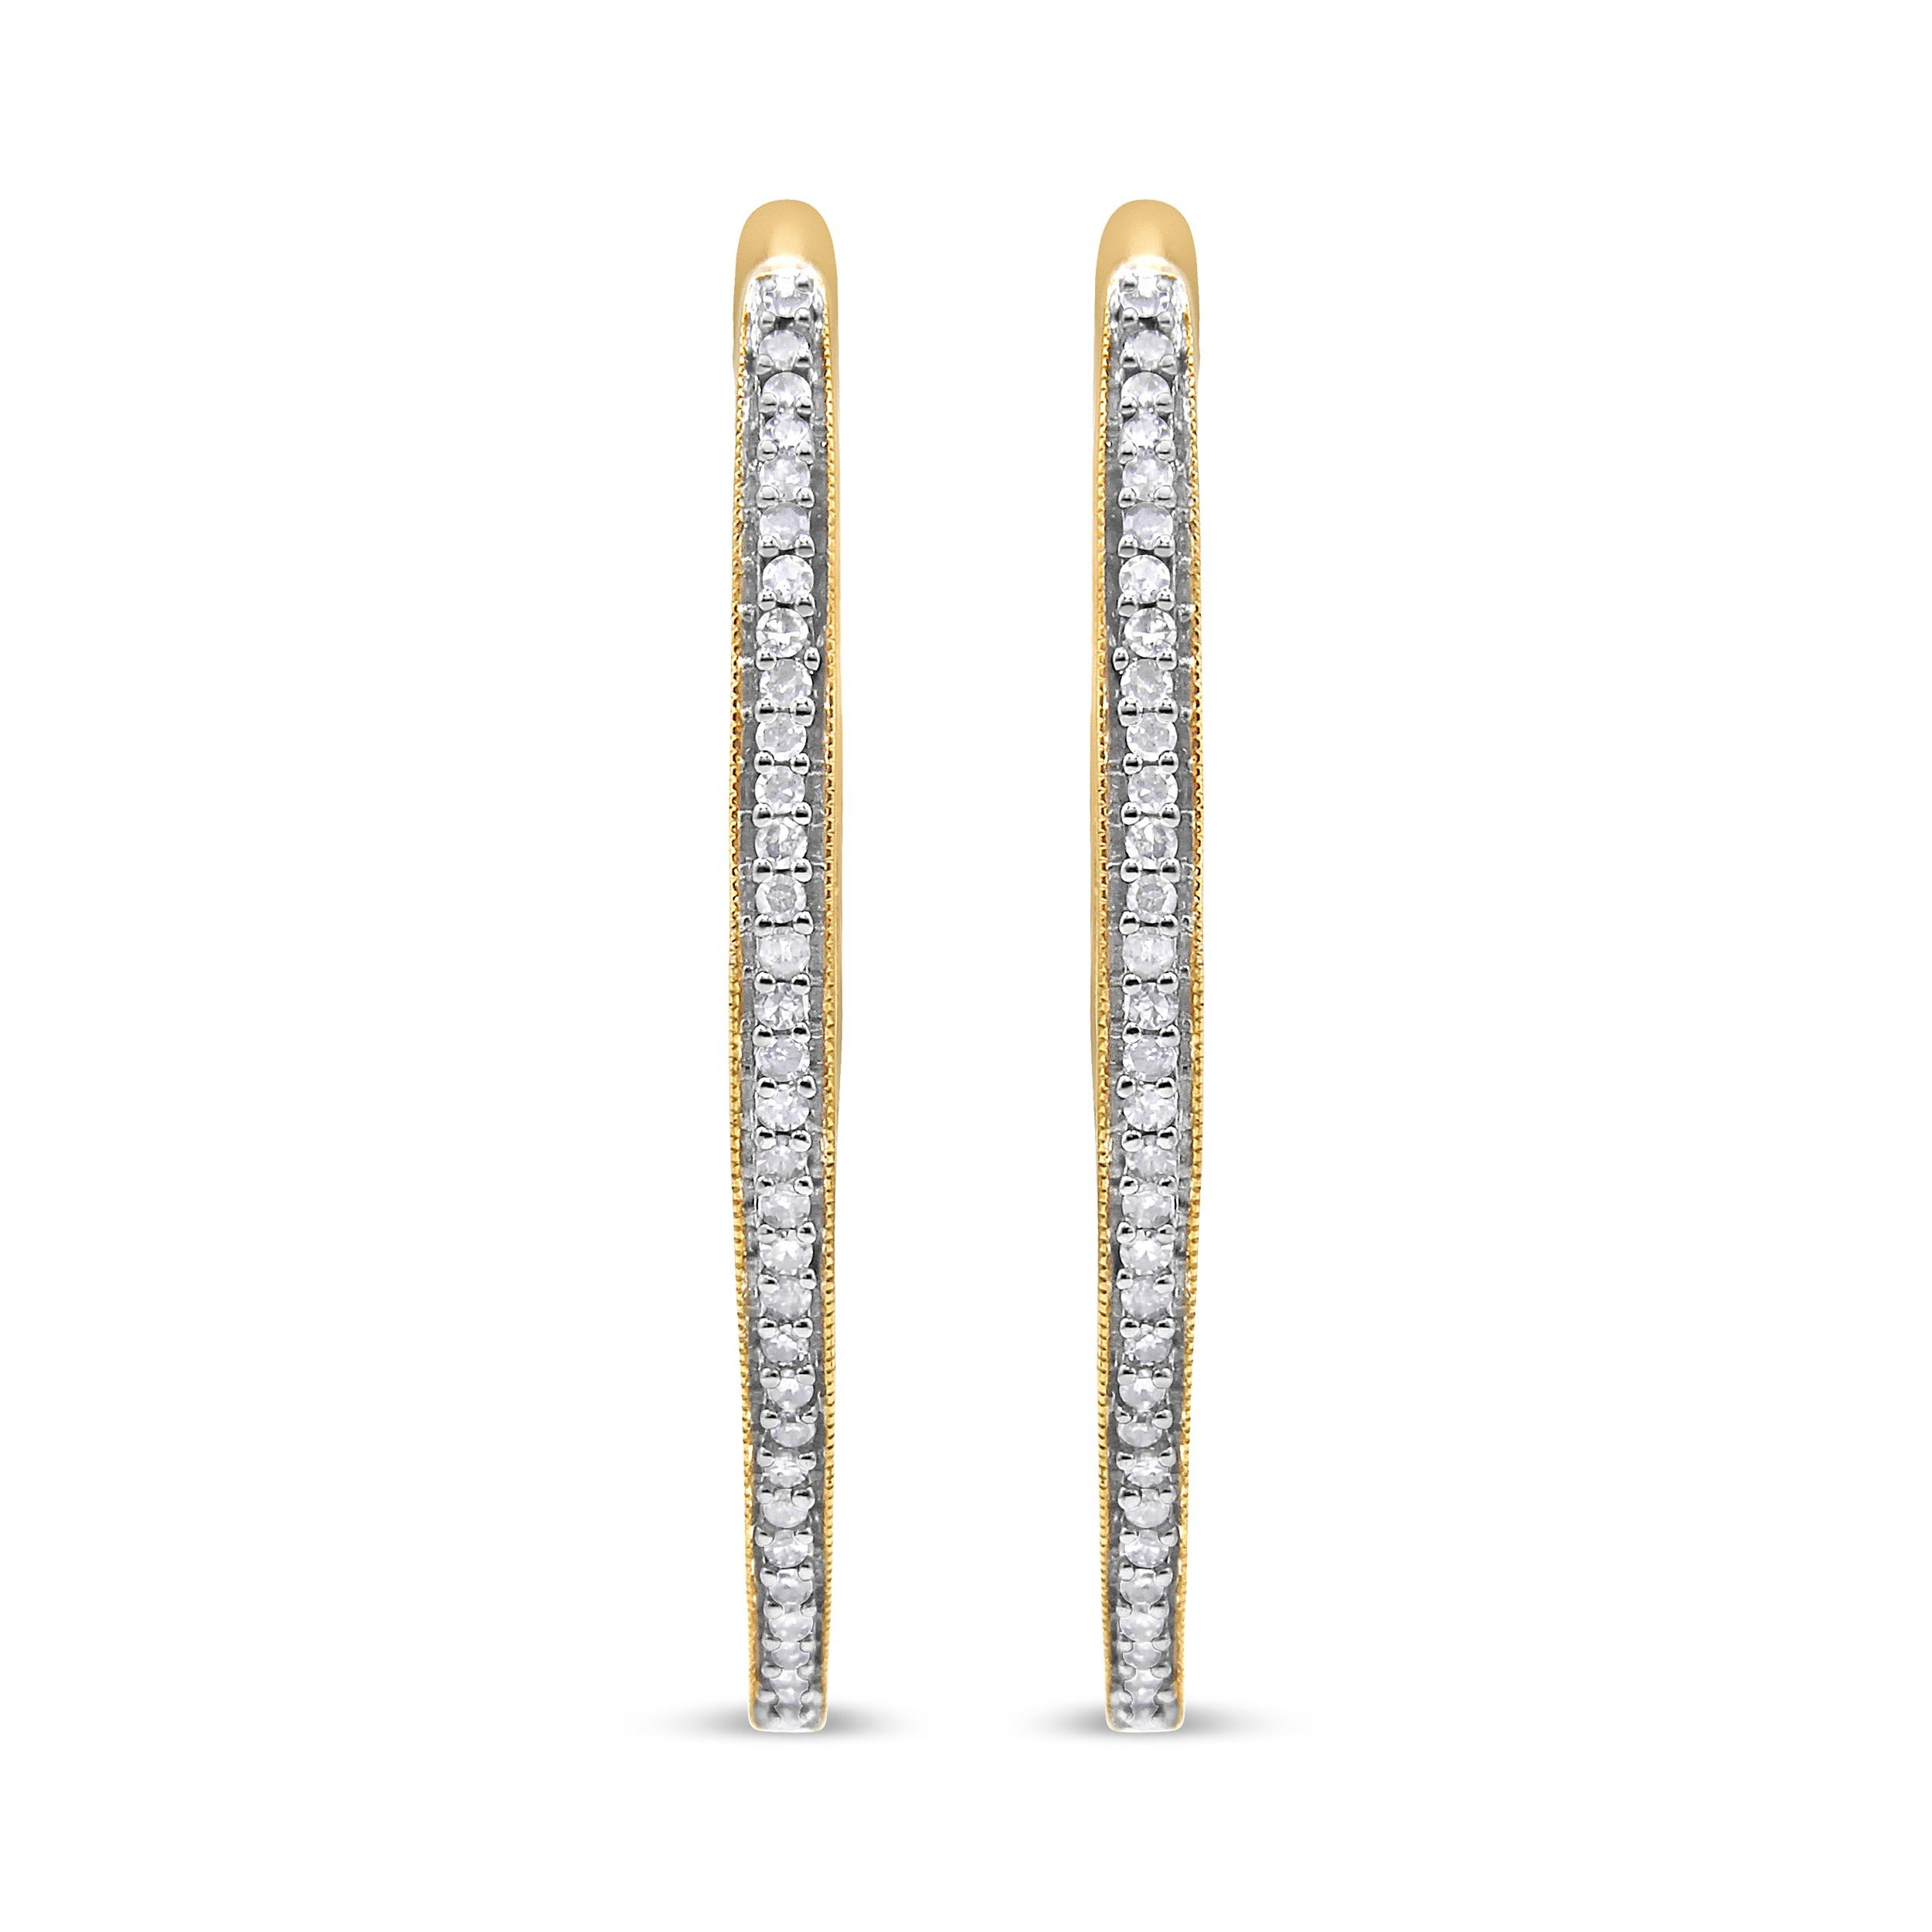 These glamorous 10k yellow gold hoop earrings showcase 1ct of round cut diamonds. The prong set diamonds inlay half the inside and outside of the hoops giving them maximum sparkle. These inside out hoop earrings are the perfect gift for that trendy,